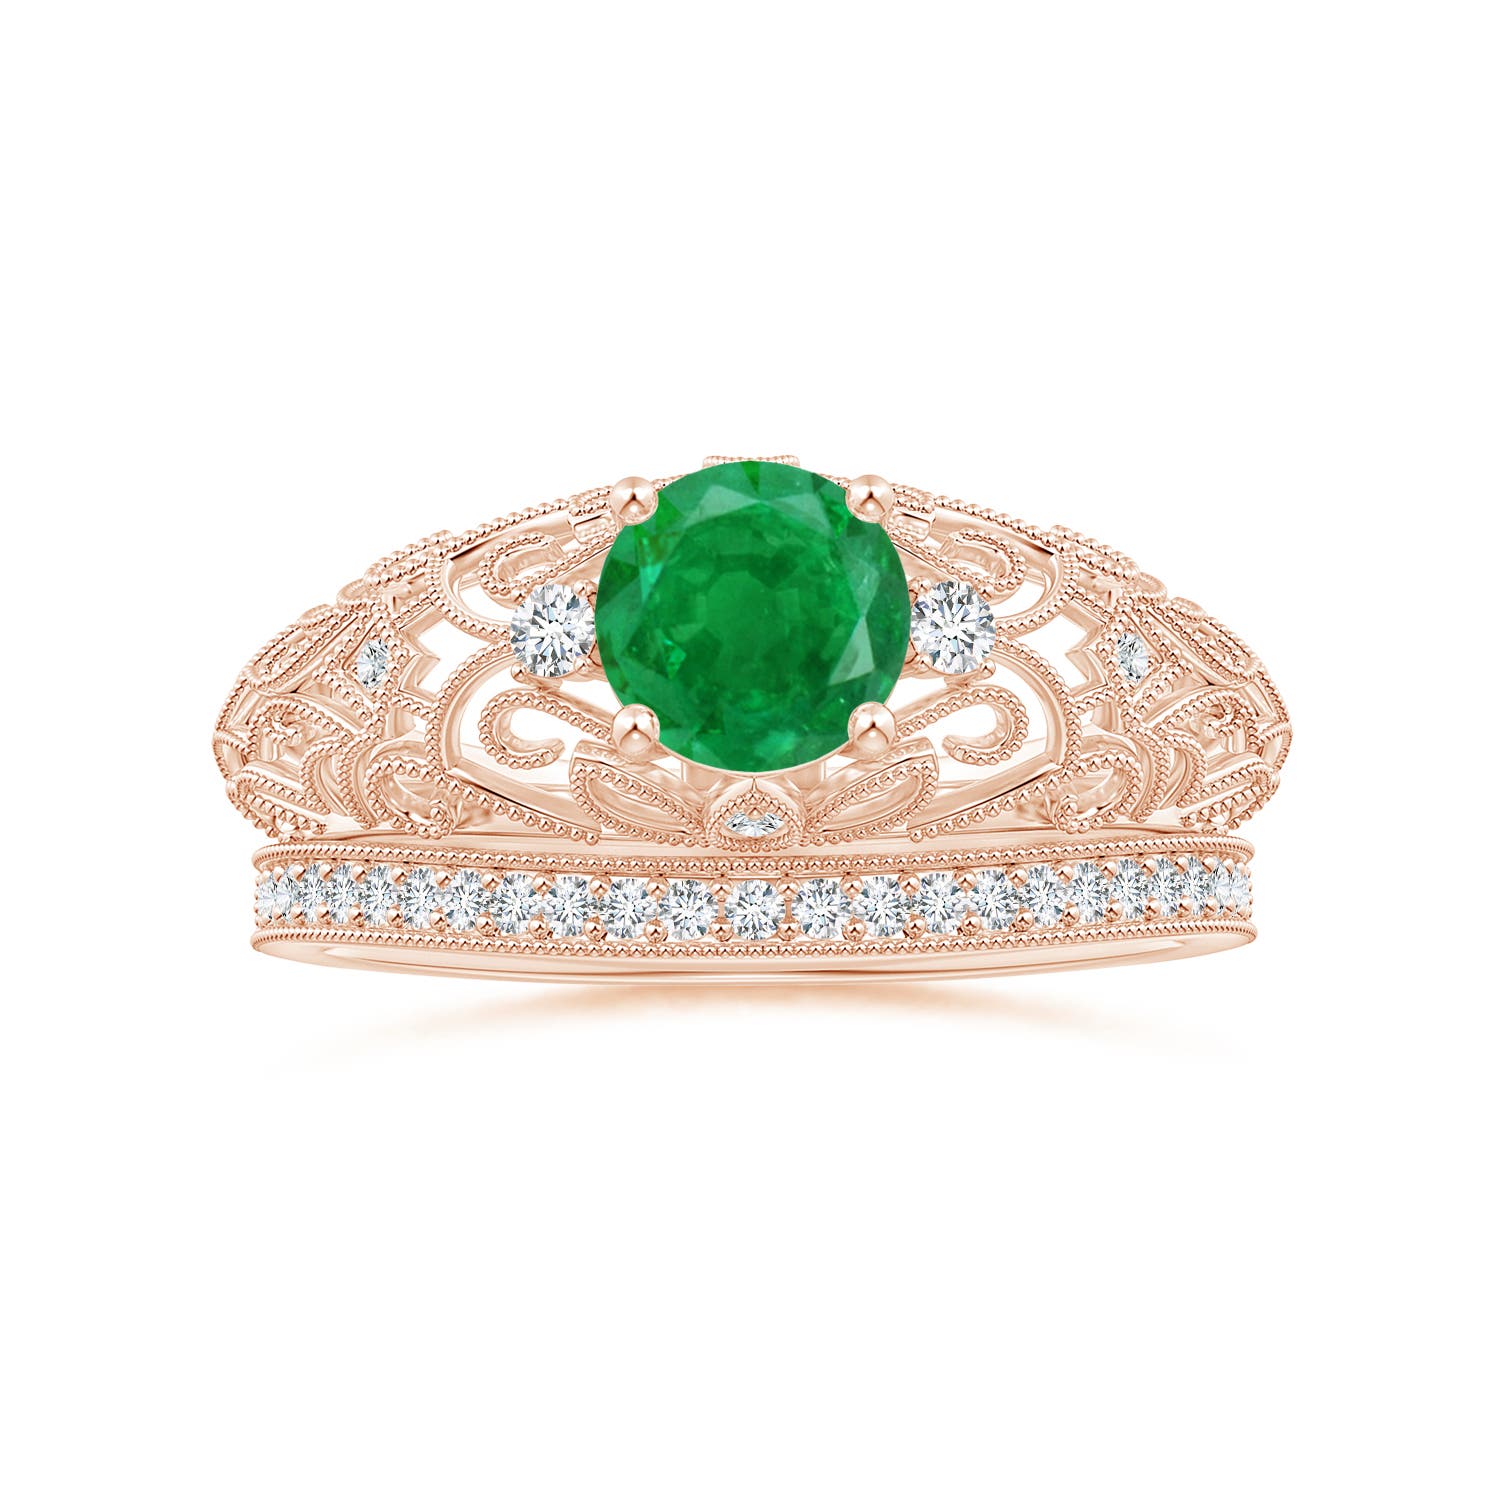 AA - Emerald / 0.82 CT / 14 KT Rose Gold